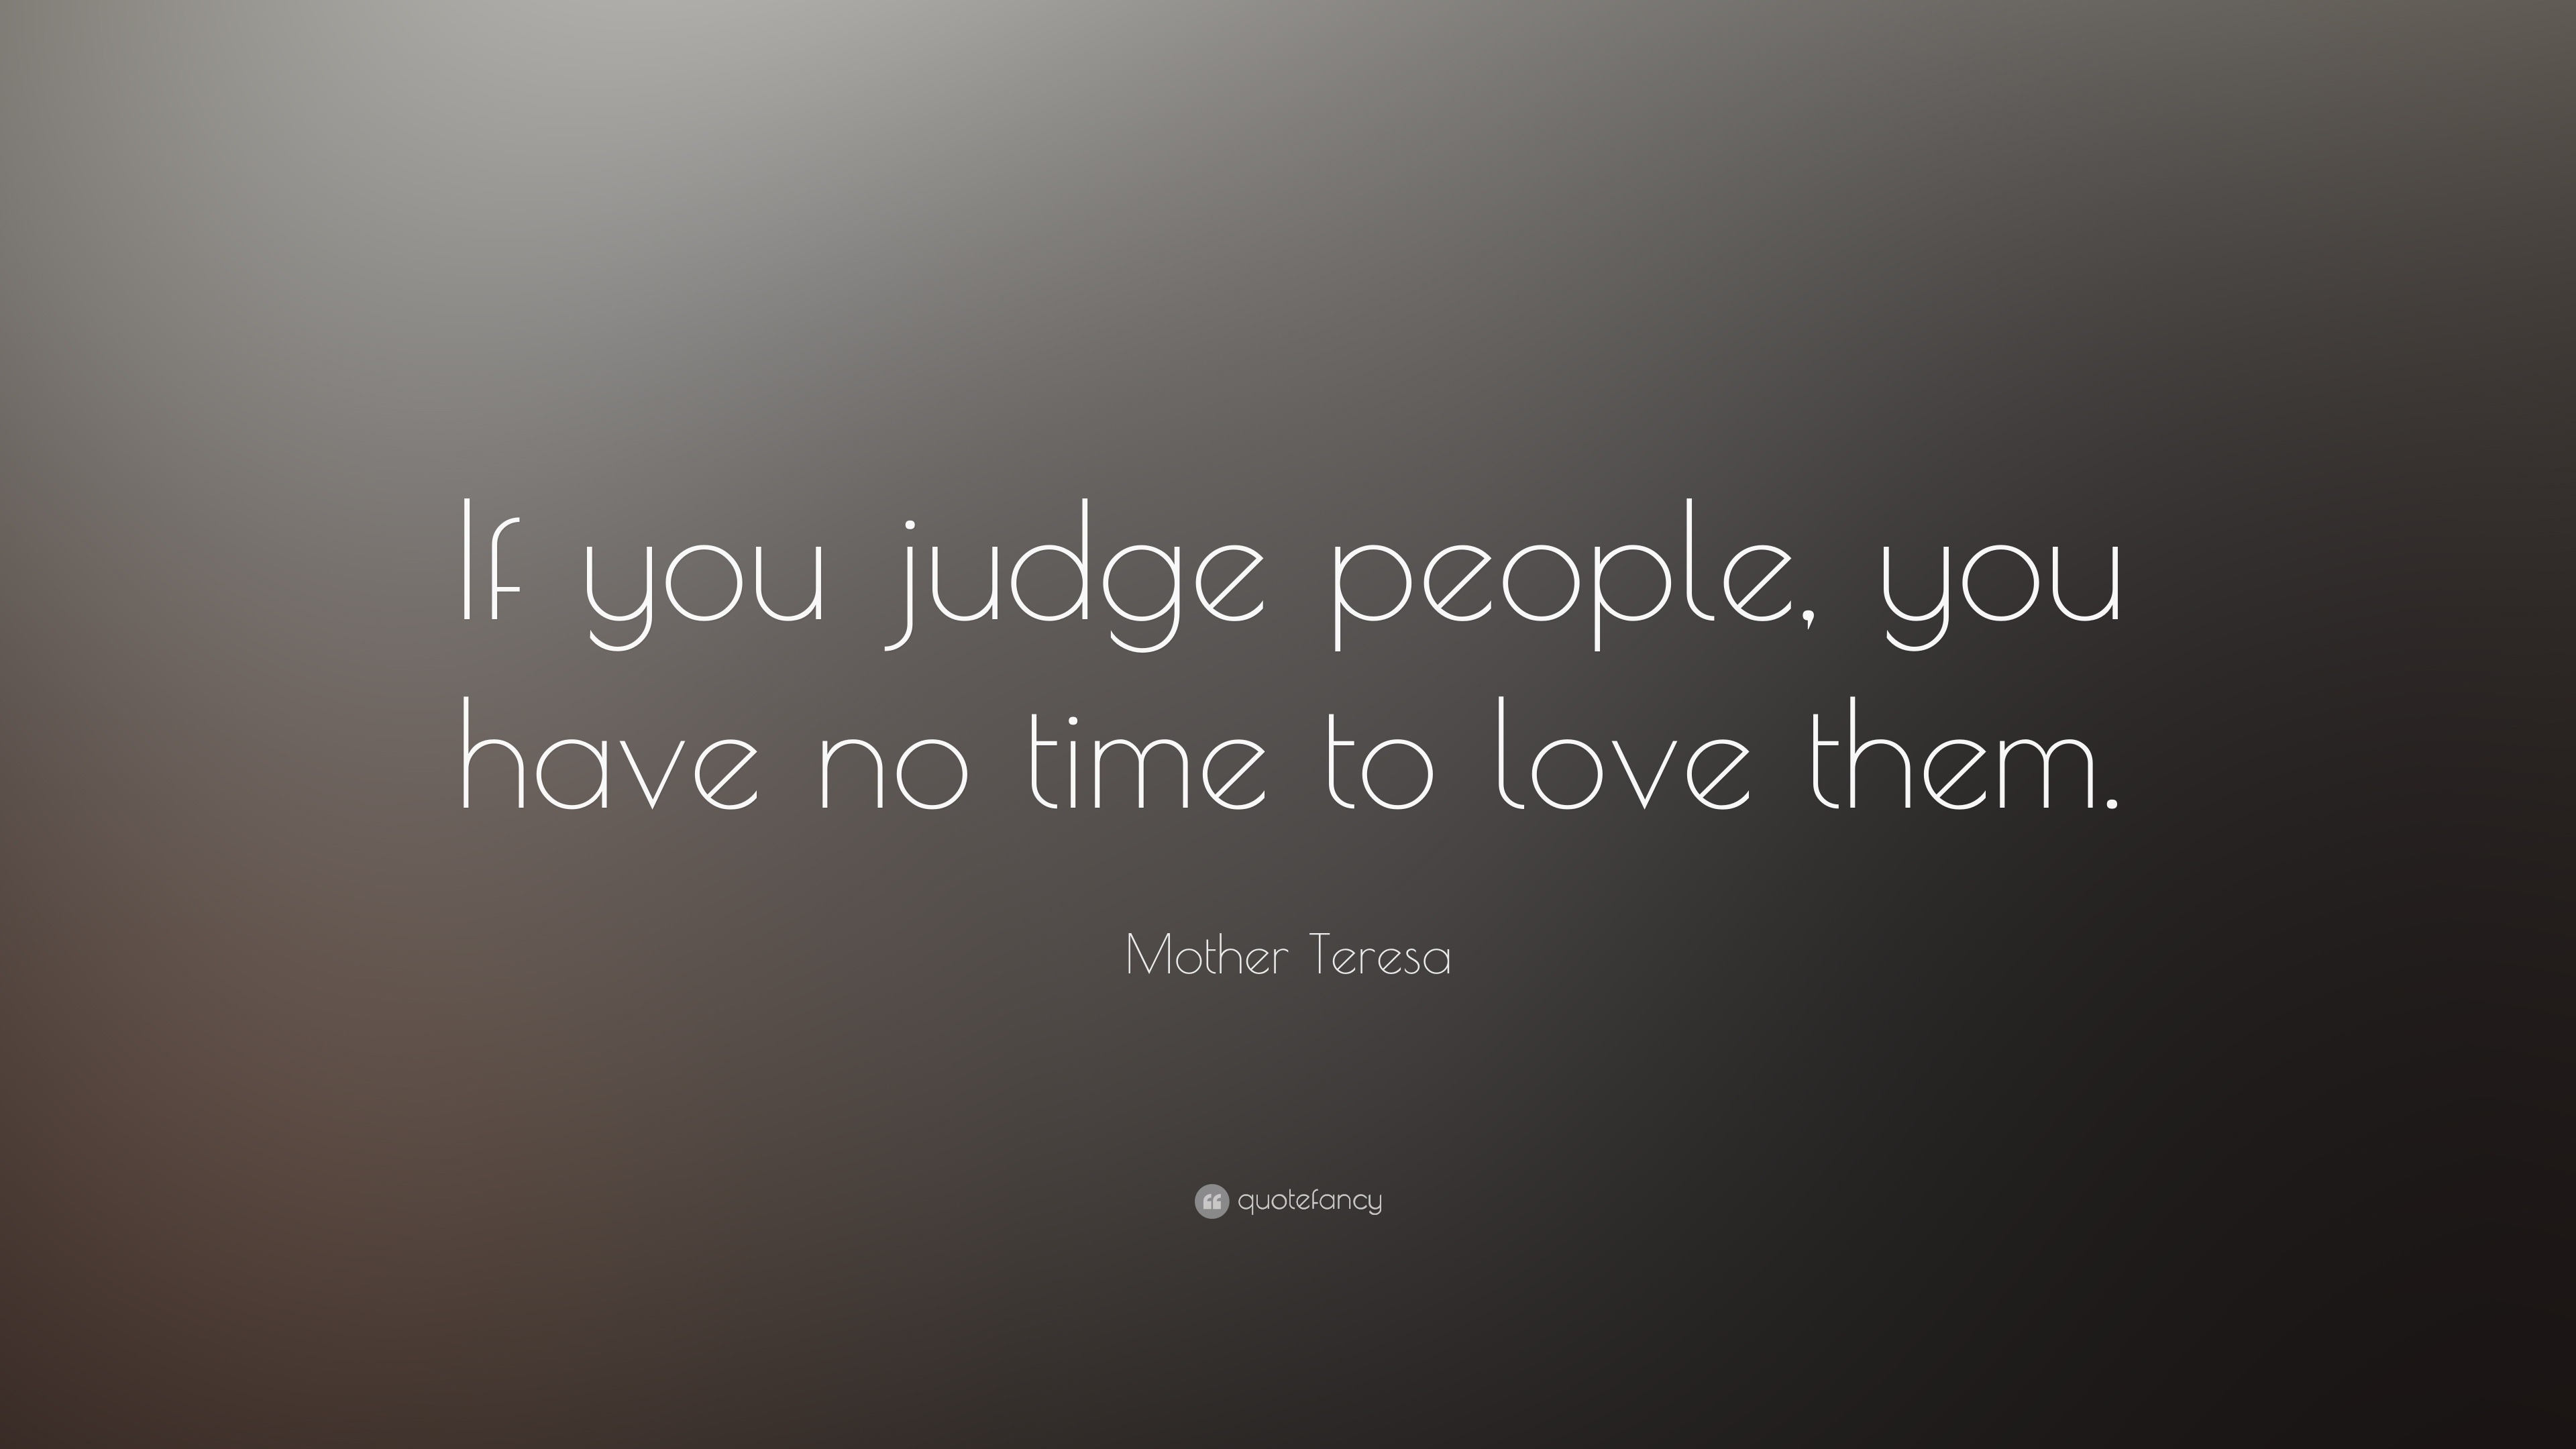 Mother Teresa Quote: “If You Judge People, You Have No Time To Love Them.”